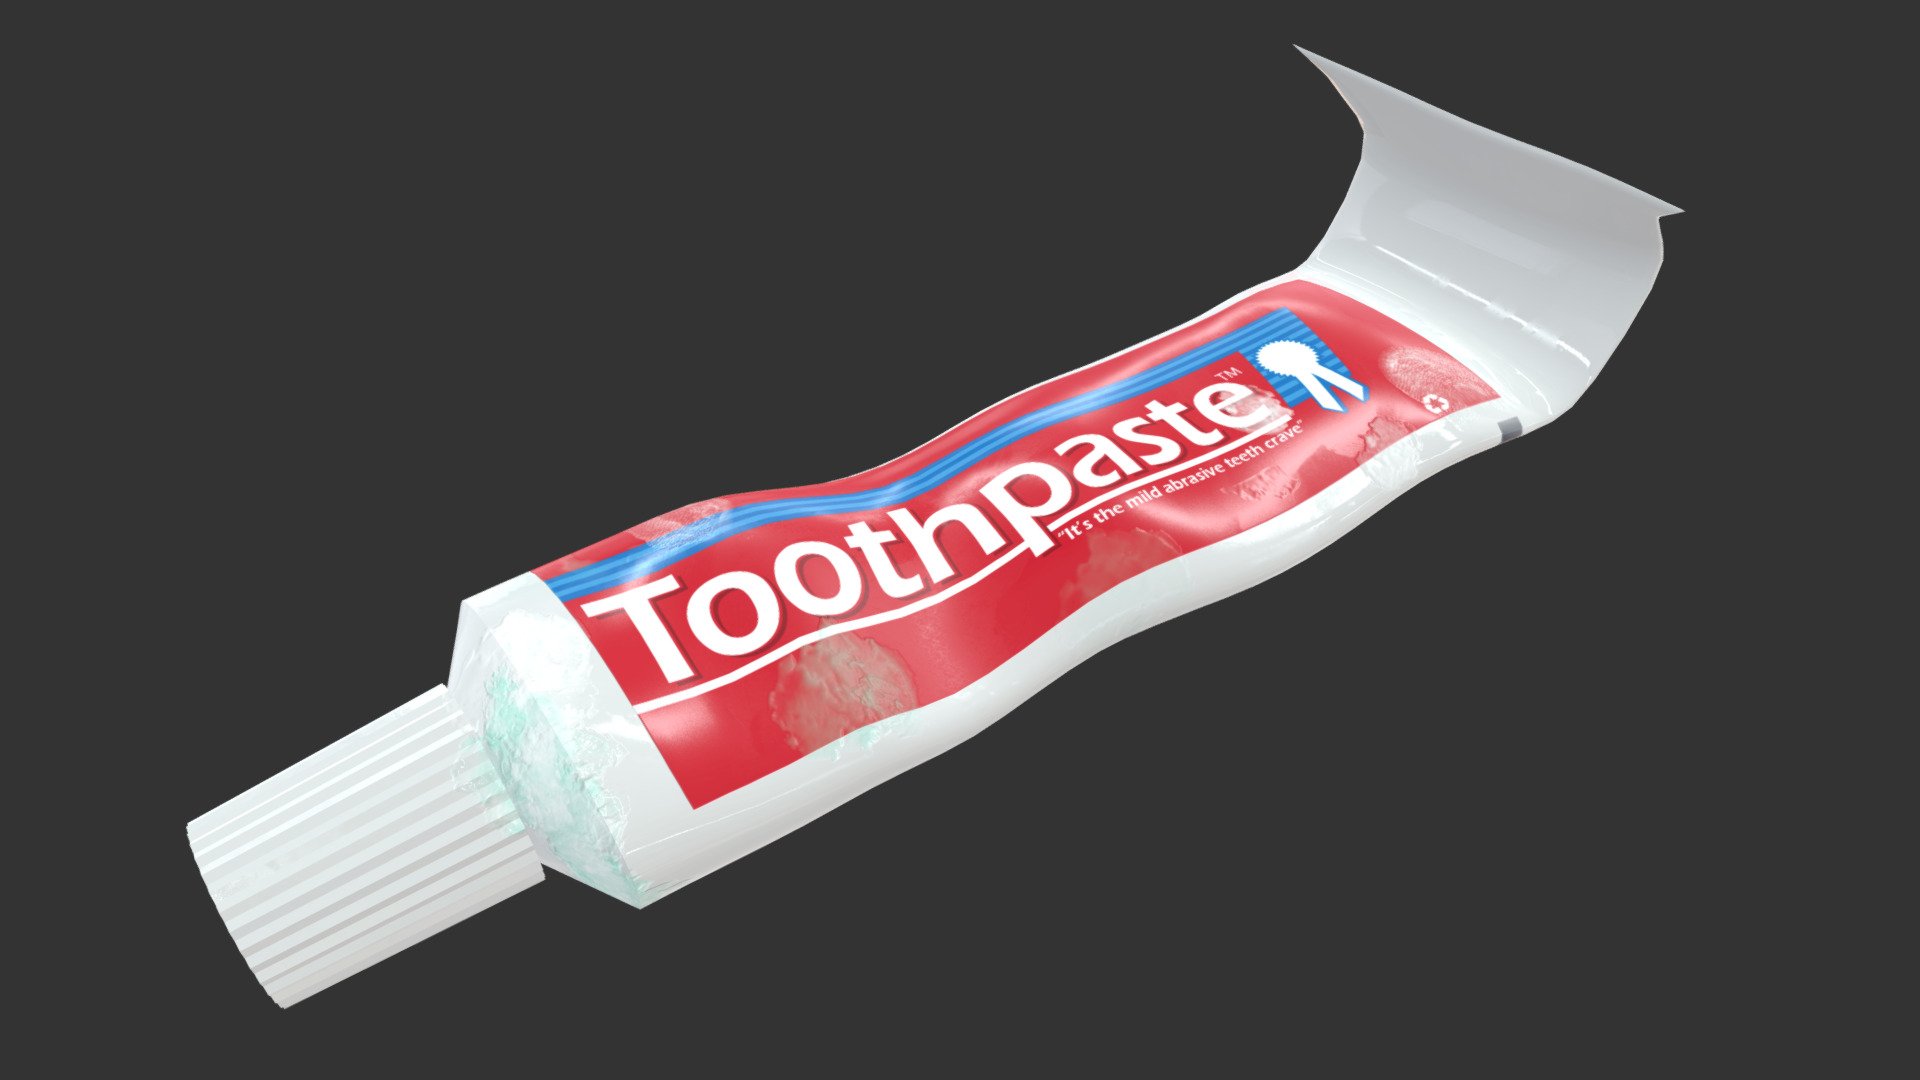 April 2019

Toothpaste Tube made for a project. Modeled in Maya and textured using Substance Painter and Photoshop 3d model